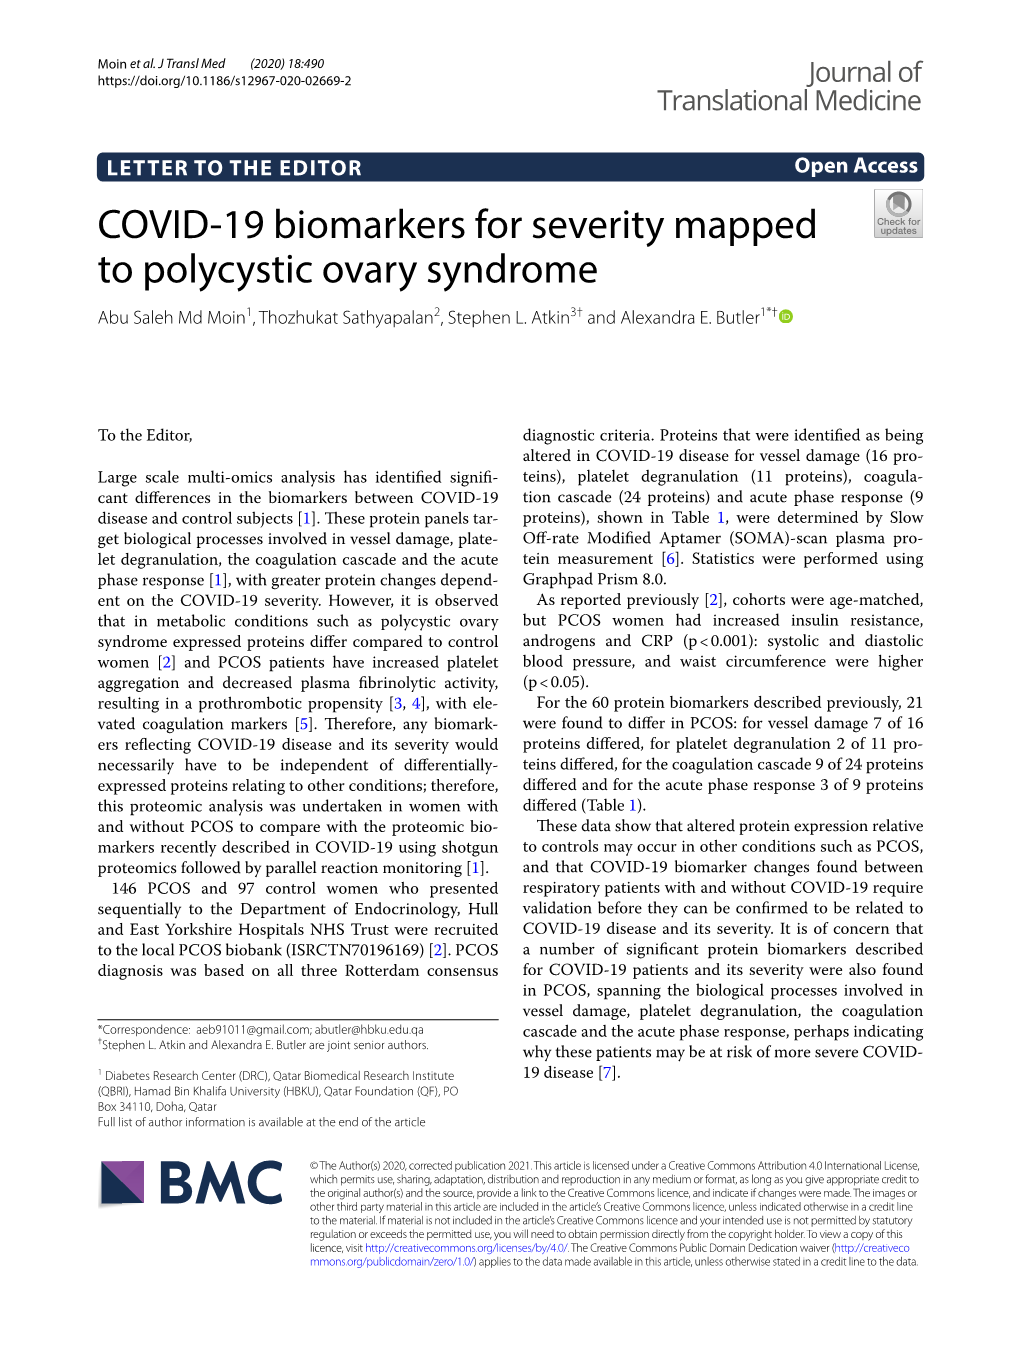 COVID-19 Biomarkers for Severity Mapped to Polycystic Ovary Syndrome